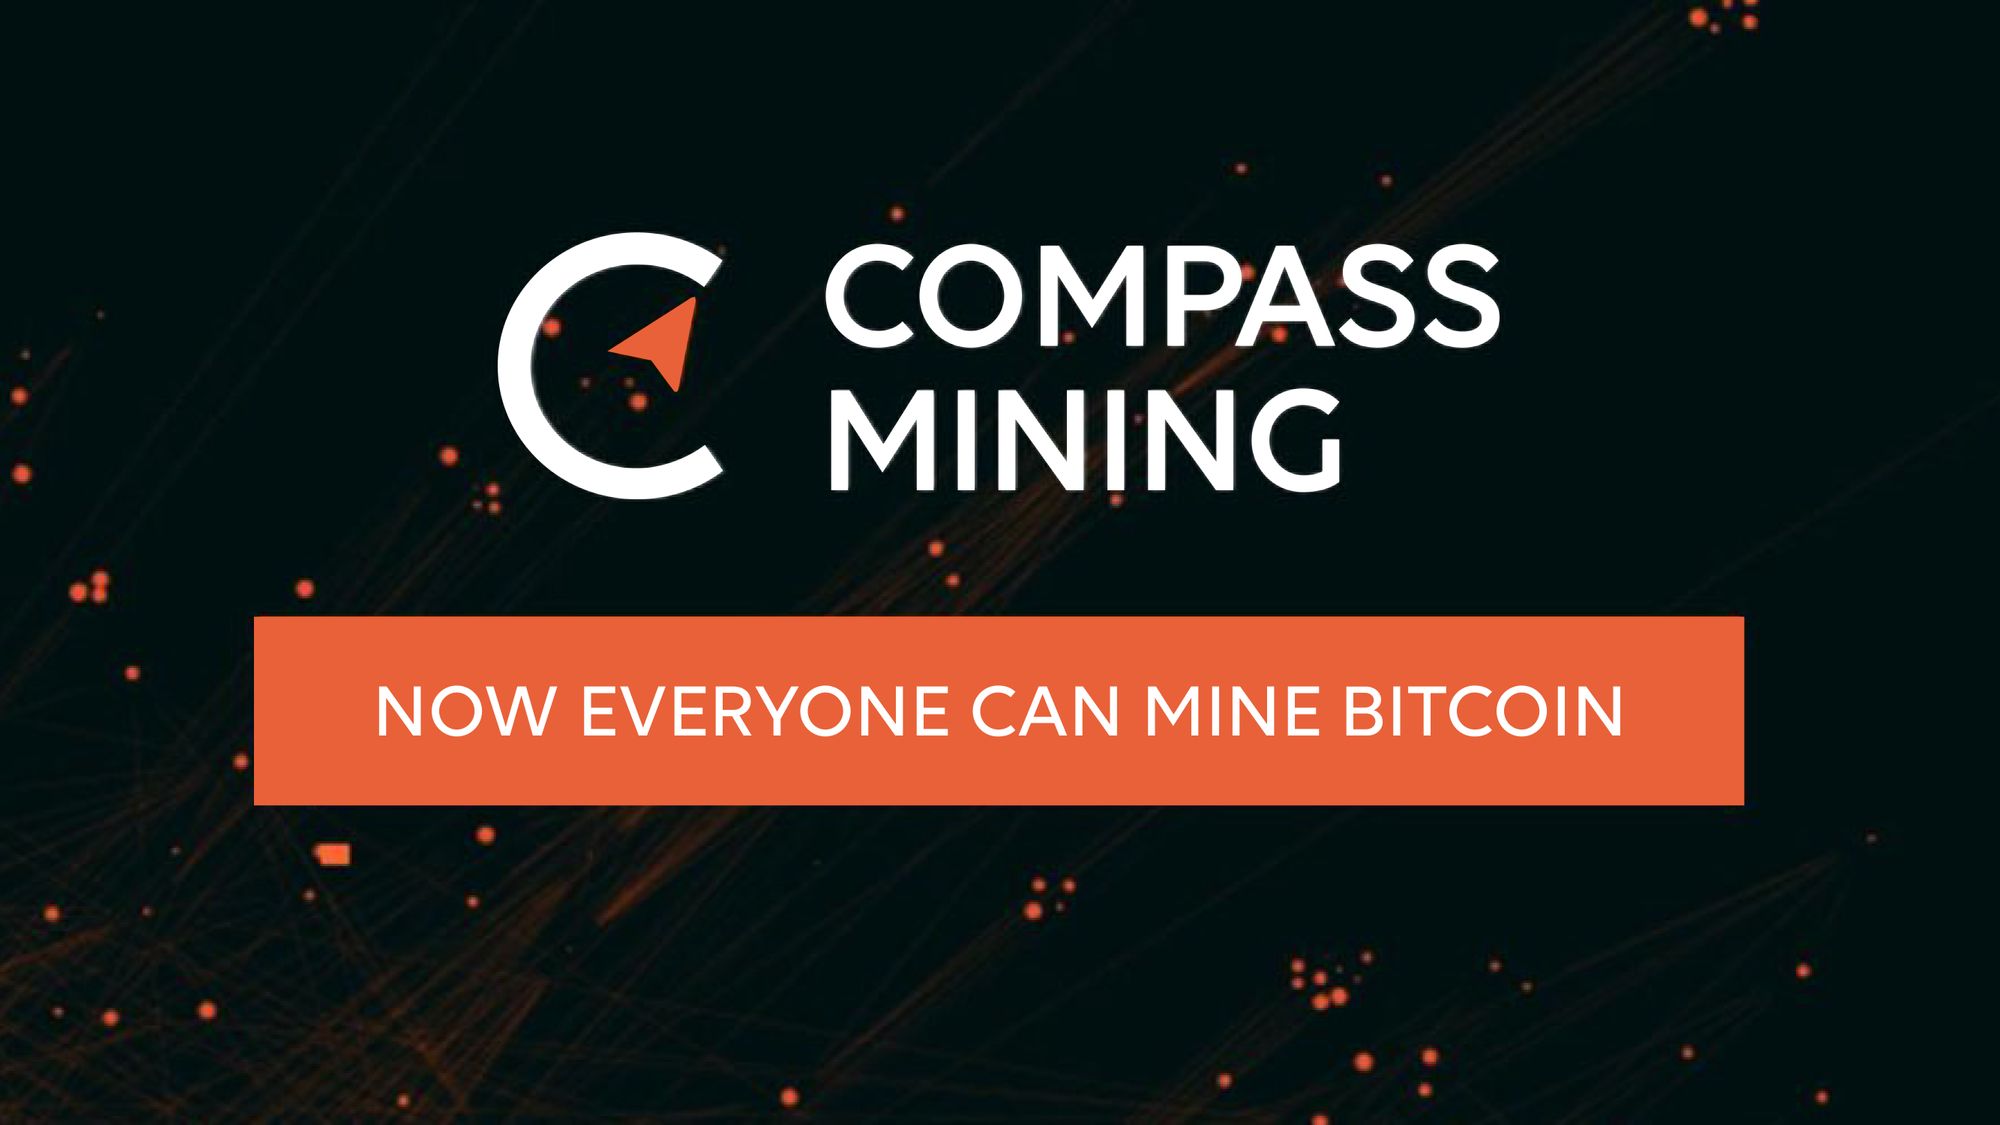 Court Rules In Favor of Compass Mining Against Dynamics